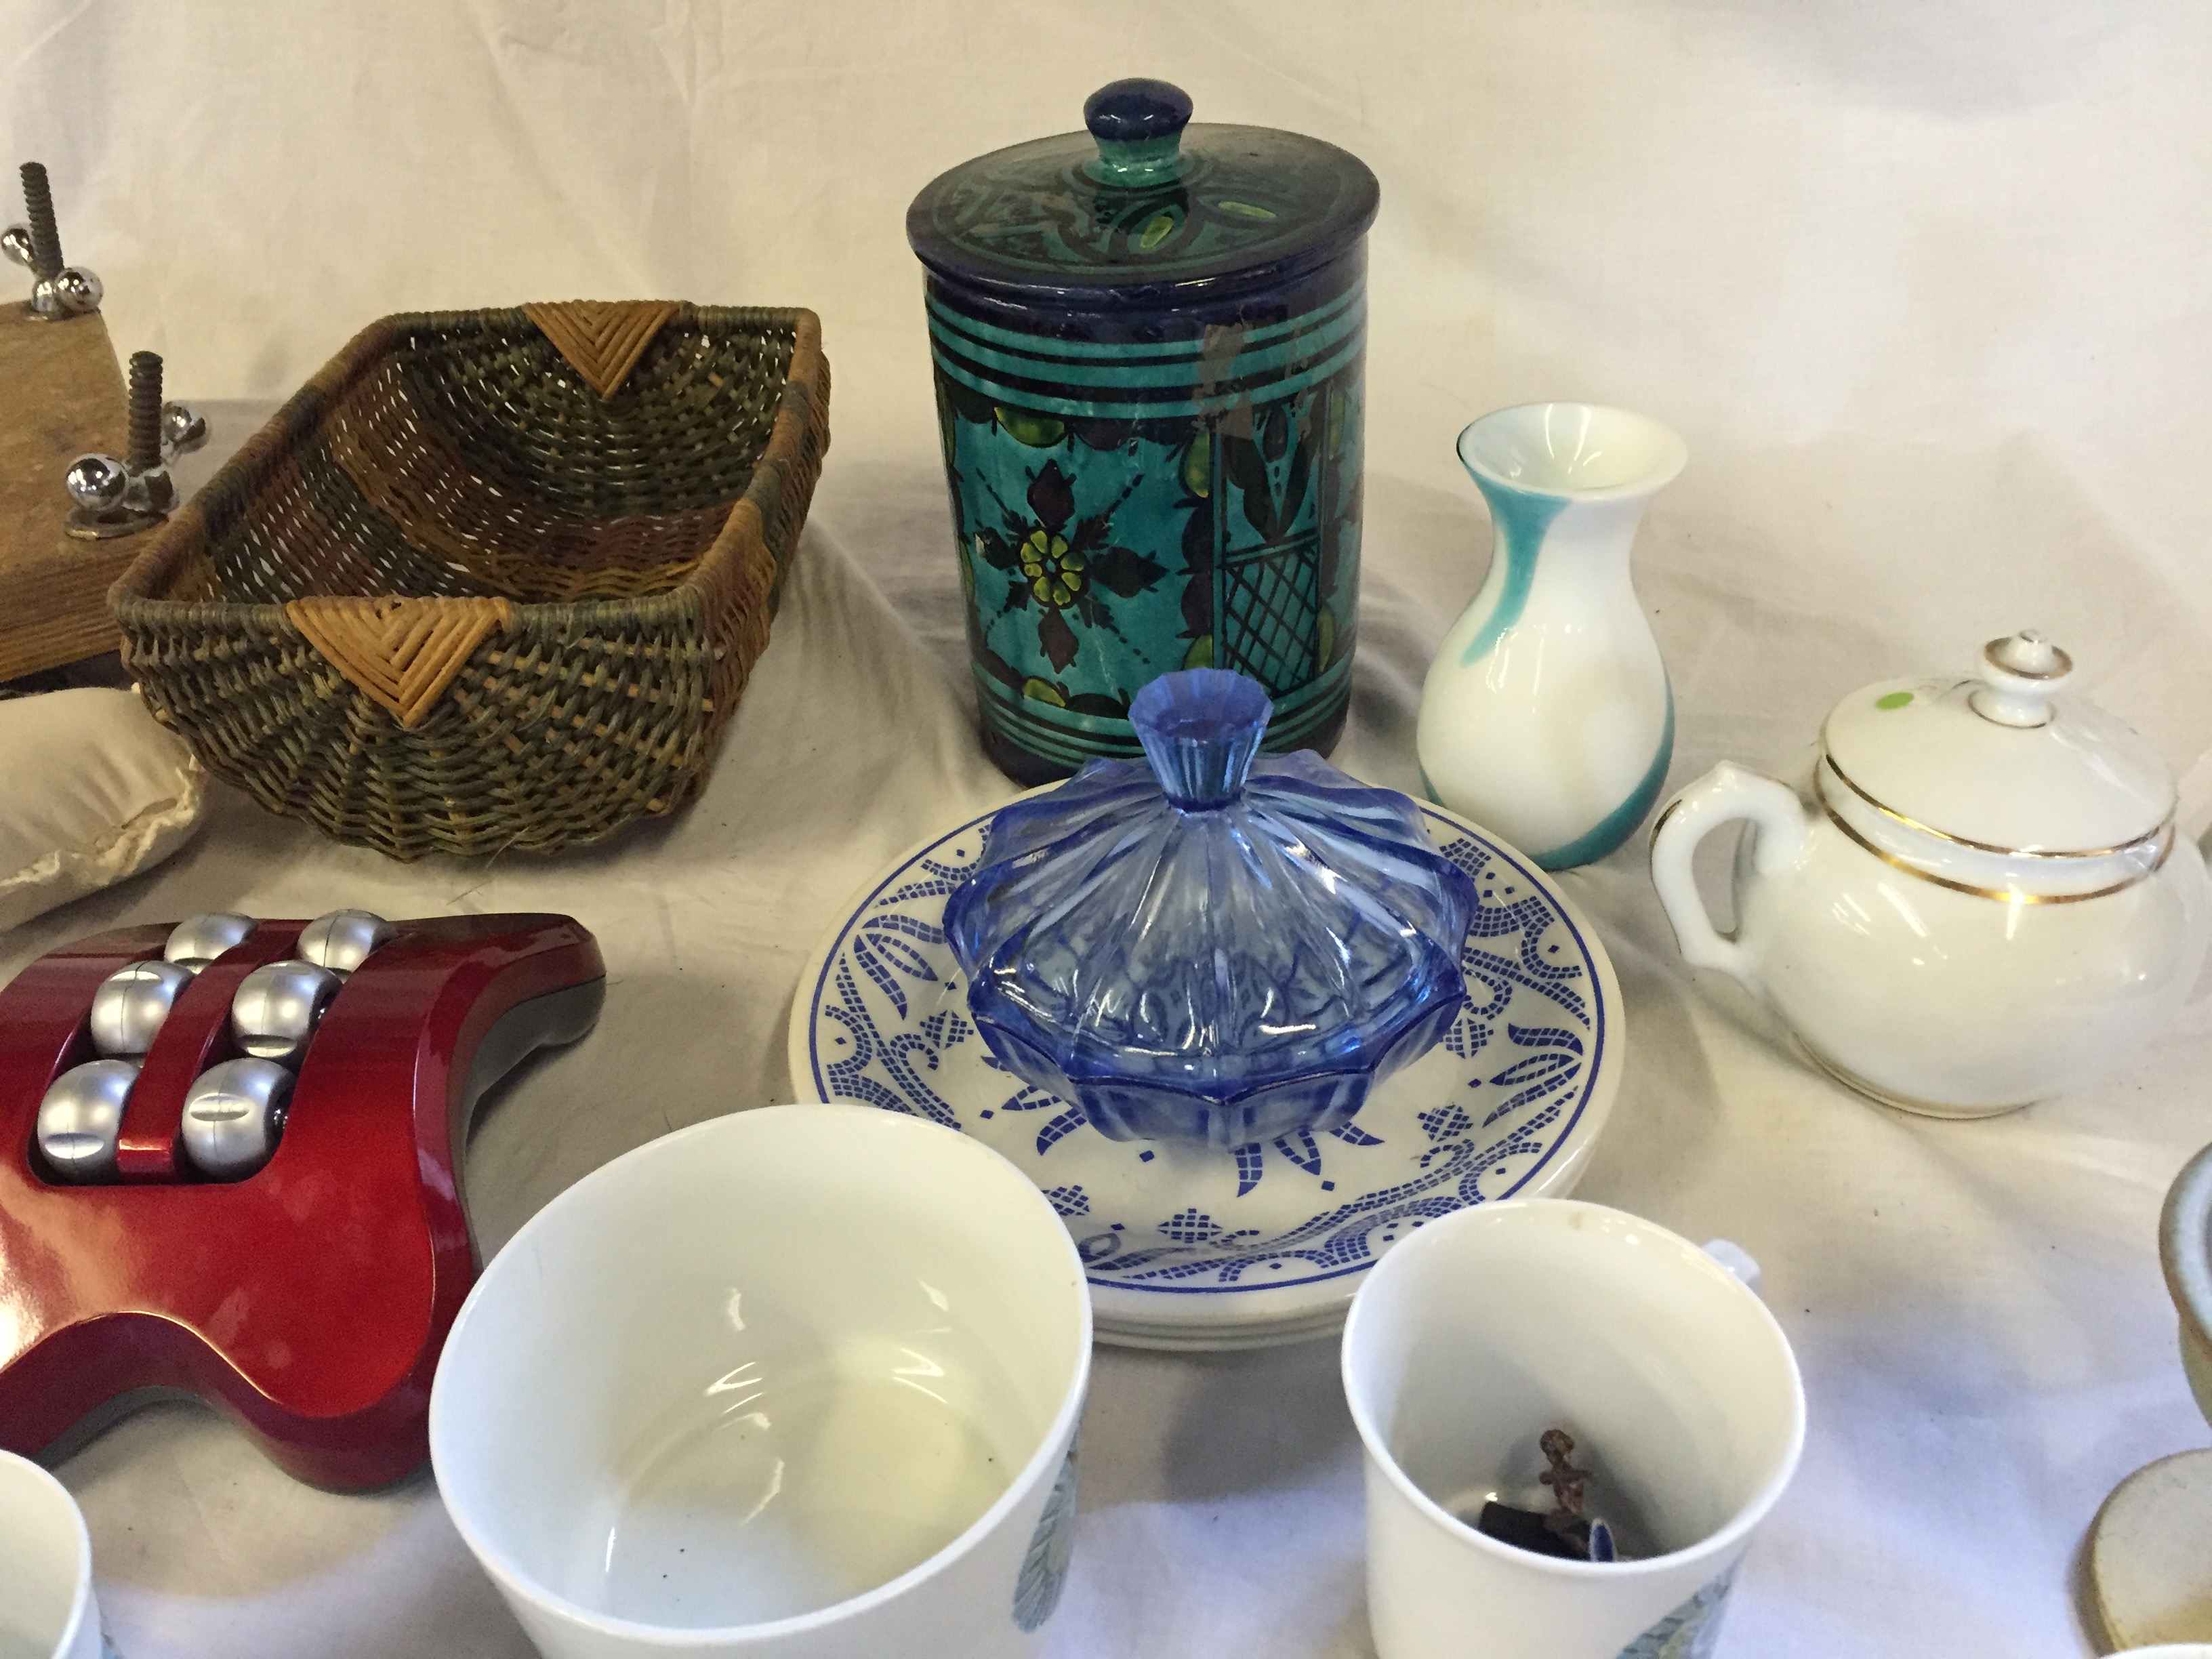 A mixed lot, a press, a wicker basket, tiles and various porcelain. - Image 2 of 4